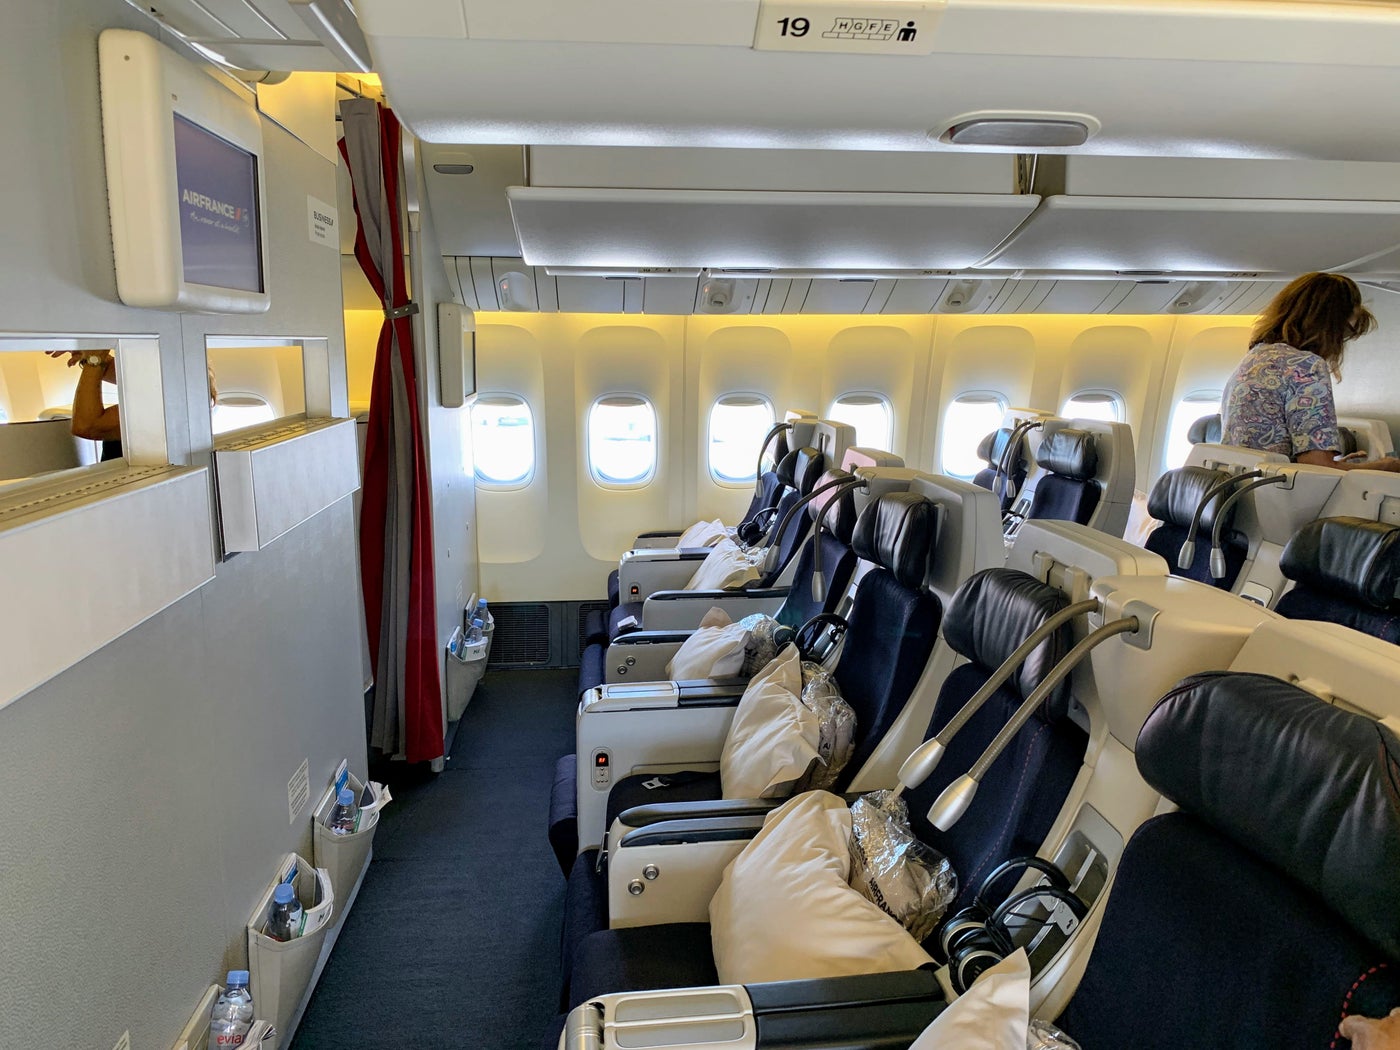 Review: Air France A350 Business Class - Live and Let's Fly